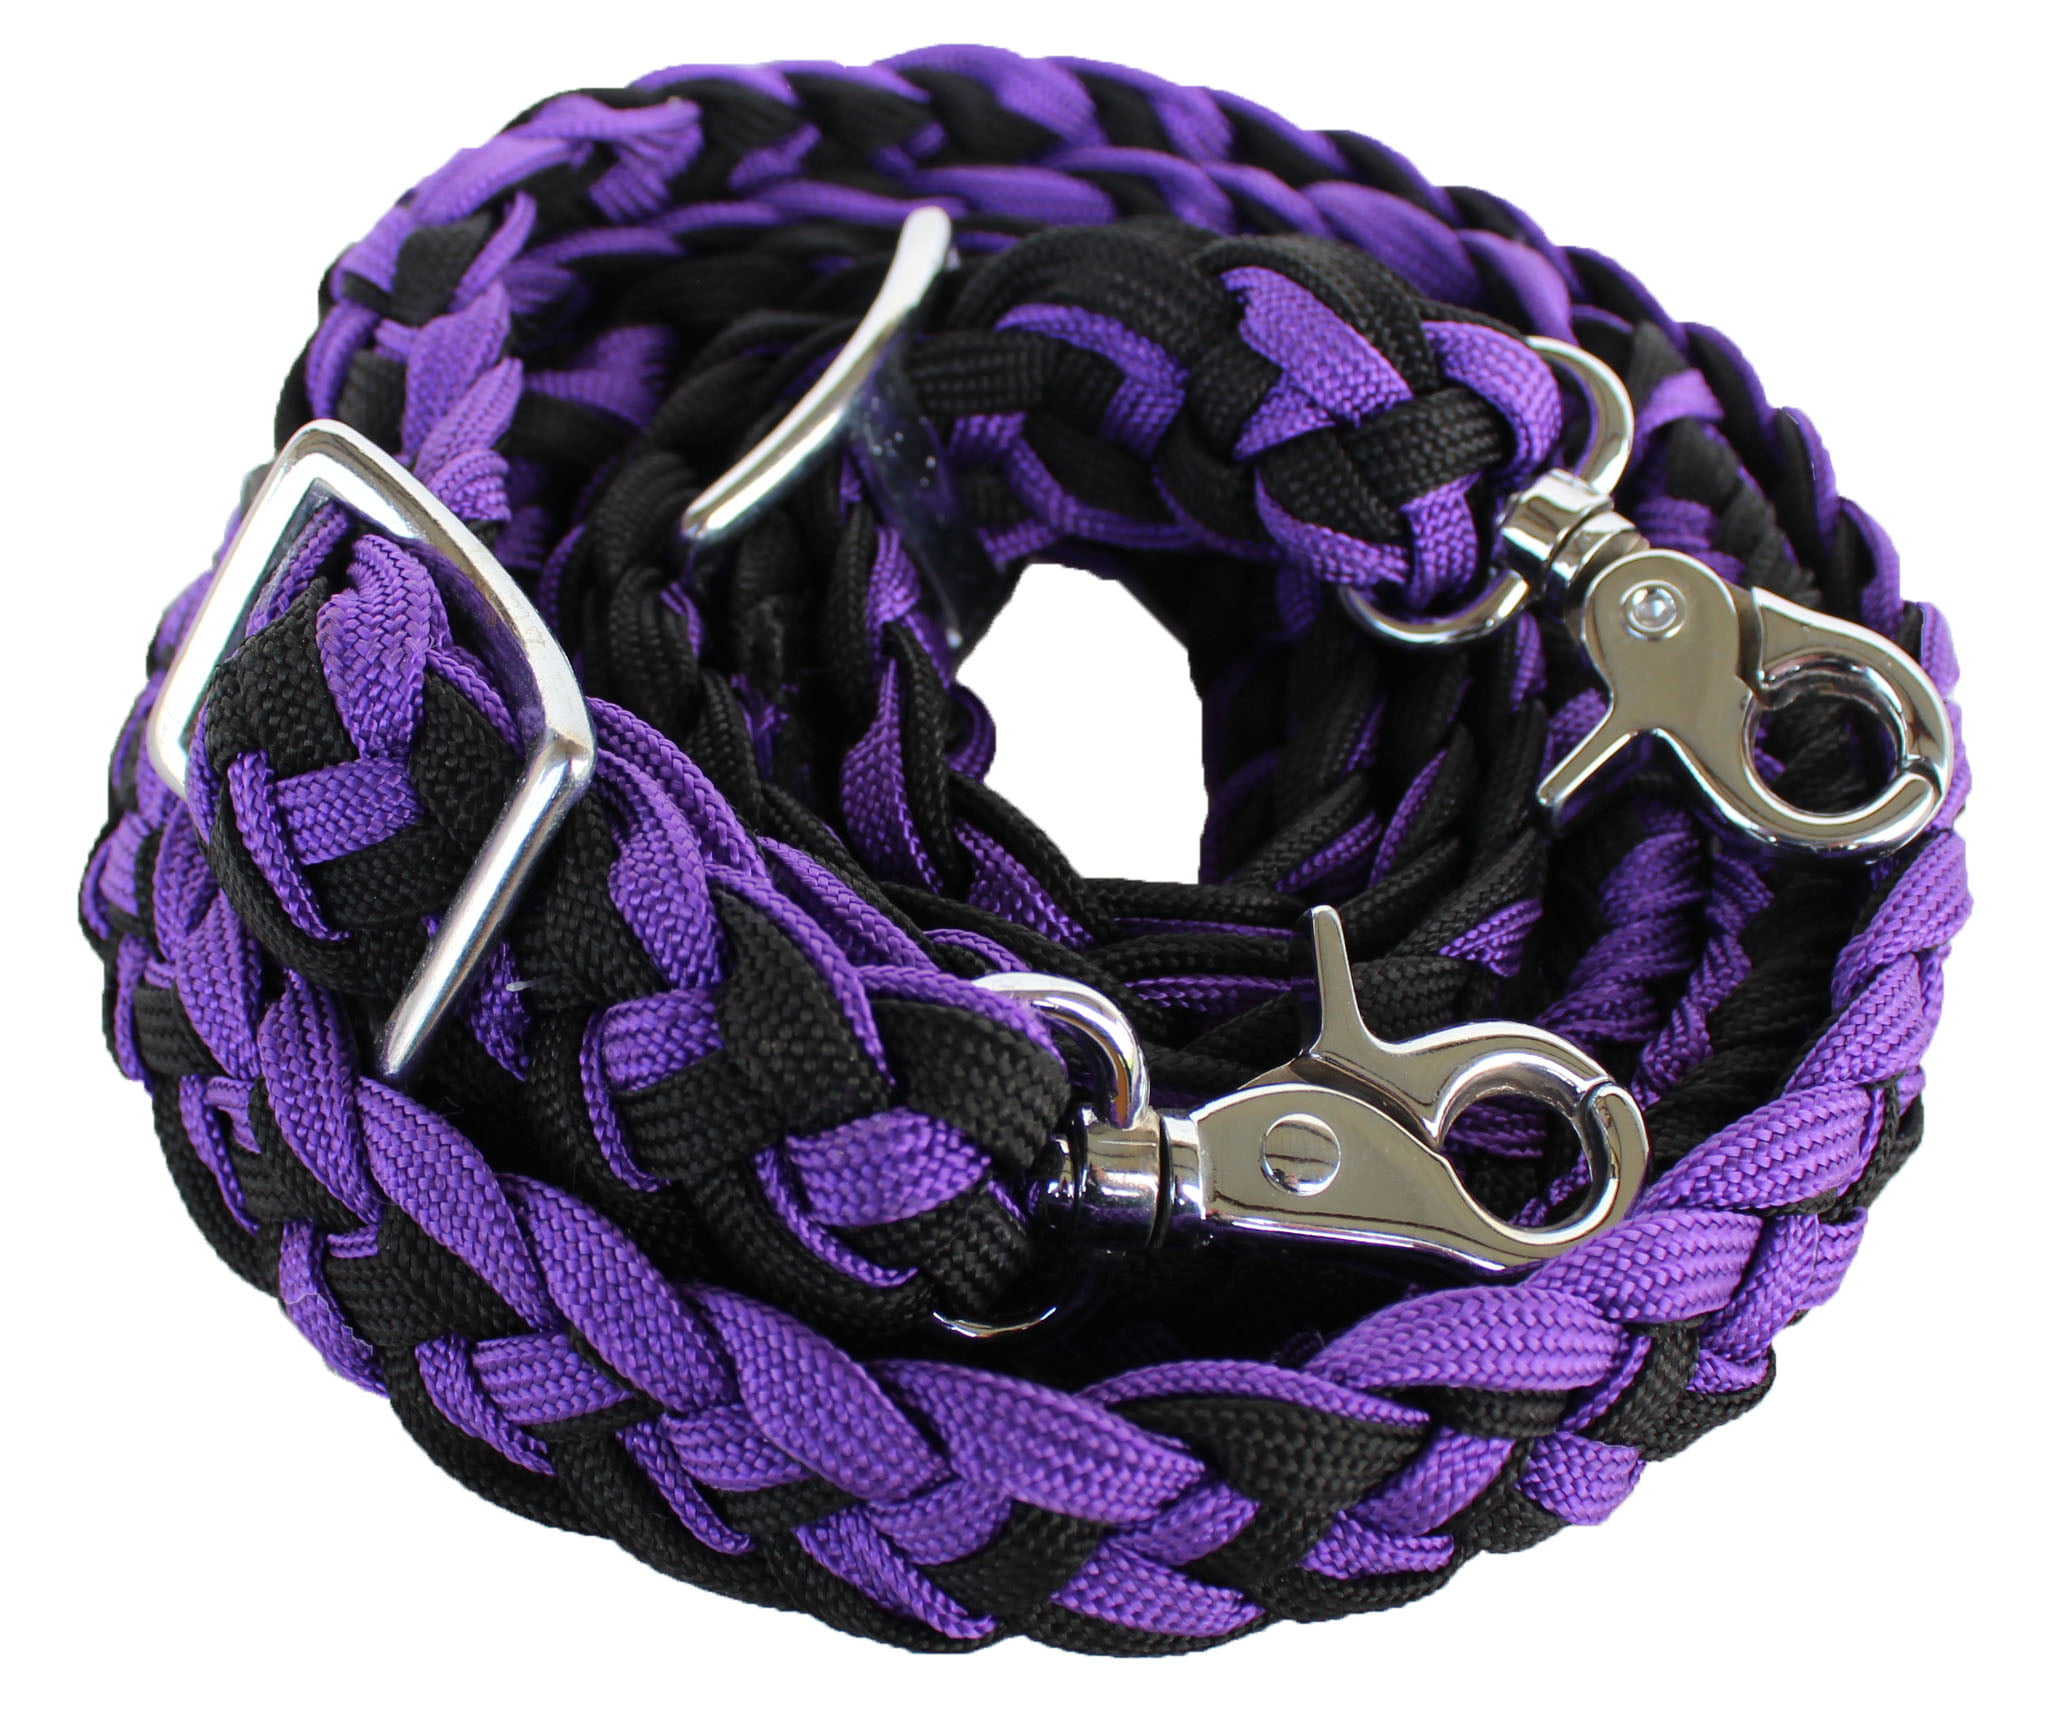 Showman Knotted Barrel Reins Durable Nylon Material and Nickle Plated Snaps